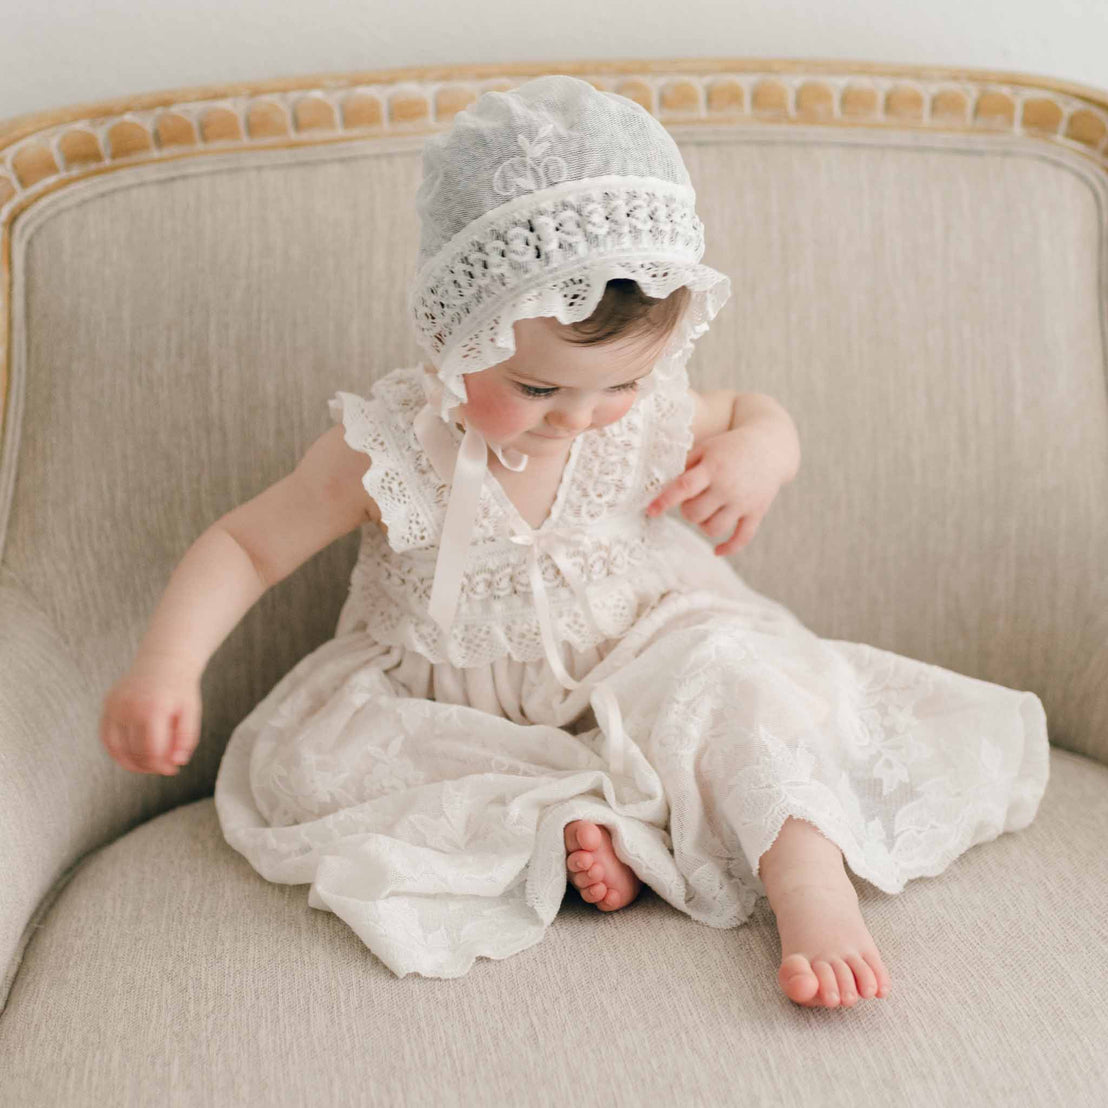 A toddler in a Charlotte Christening Gown & Bonnet sits on an elegant cream-colored chair, looking down thoughtfully. The background is a soft, beige and wood chair.